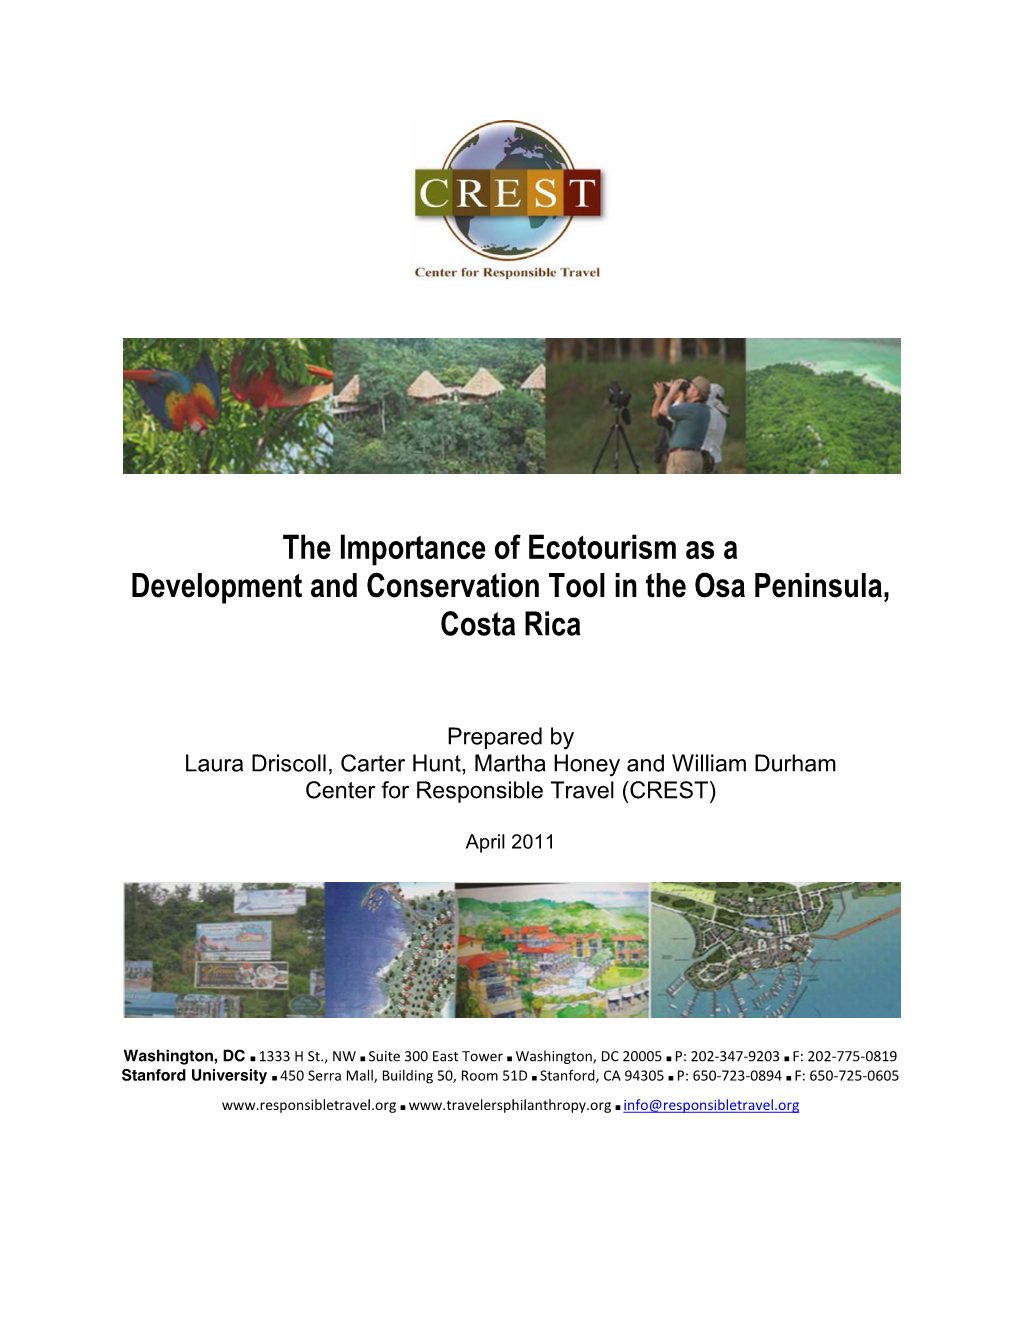 The Importance of Ecotourism As a Development and Conservation Tool in the Osa Peninsula, Costa Rica